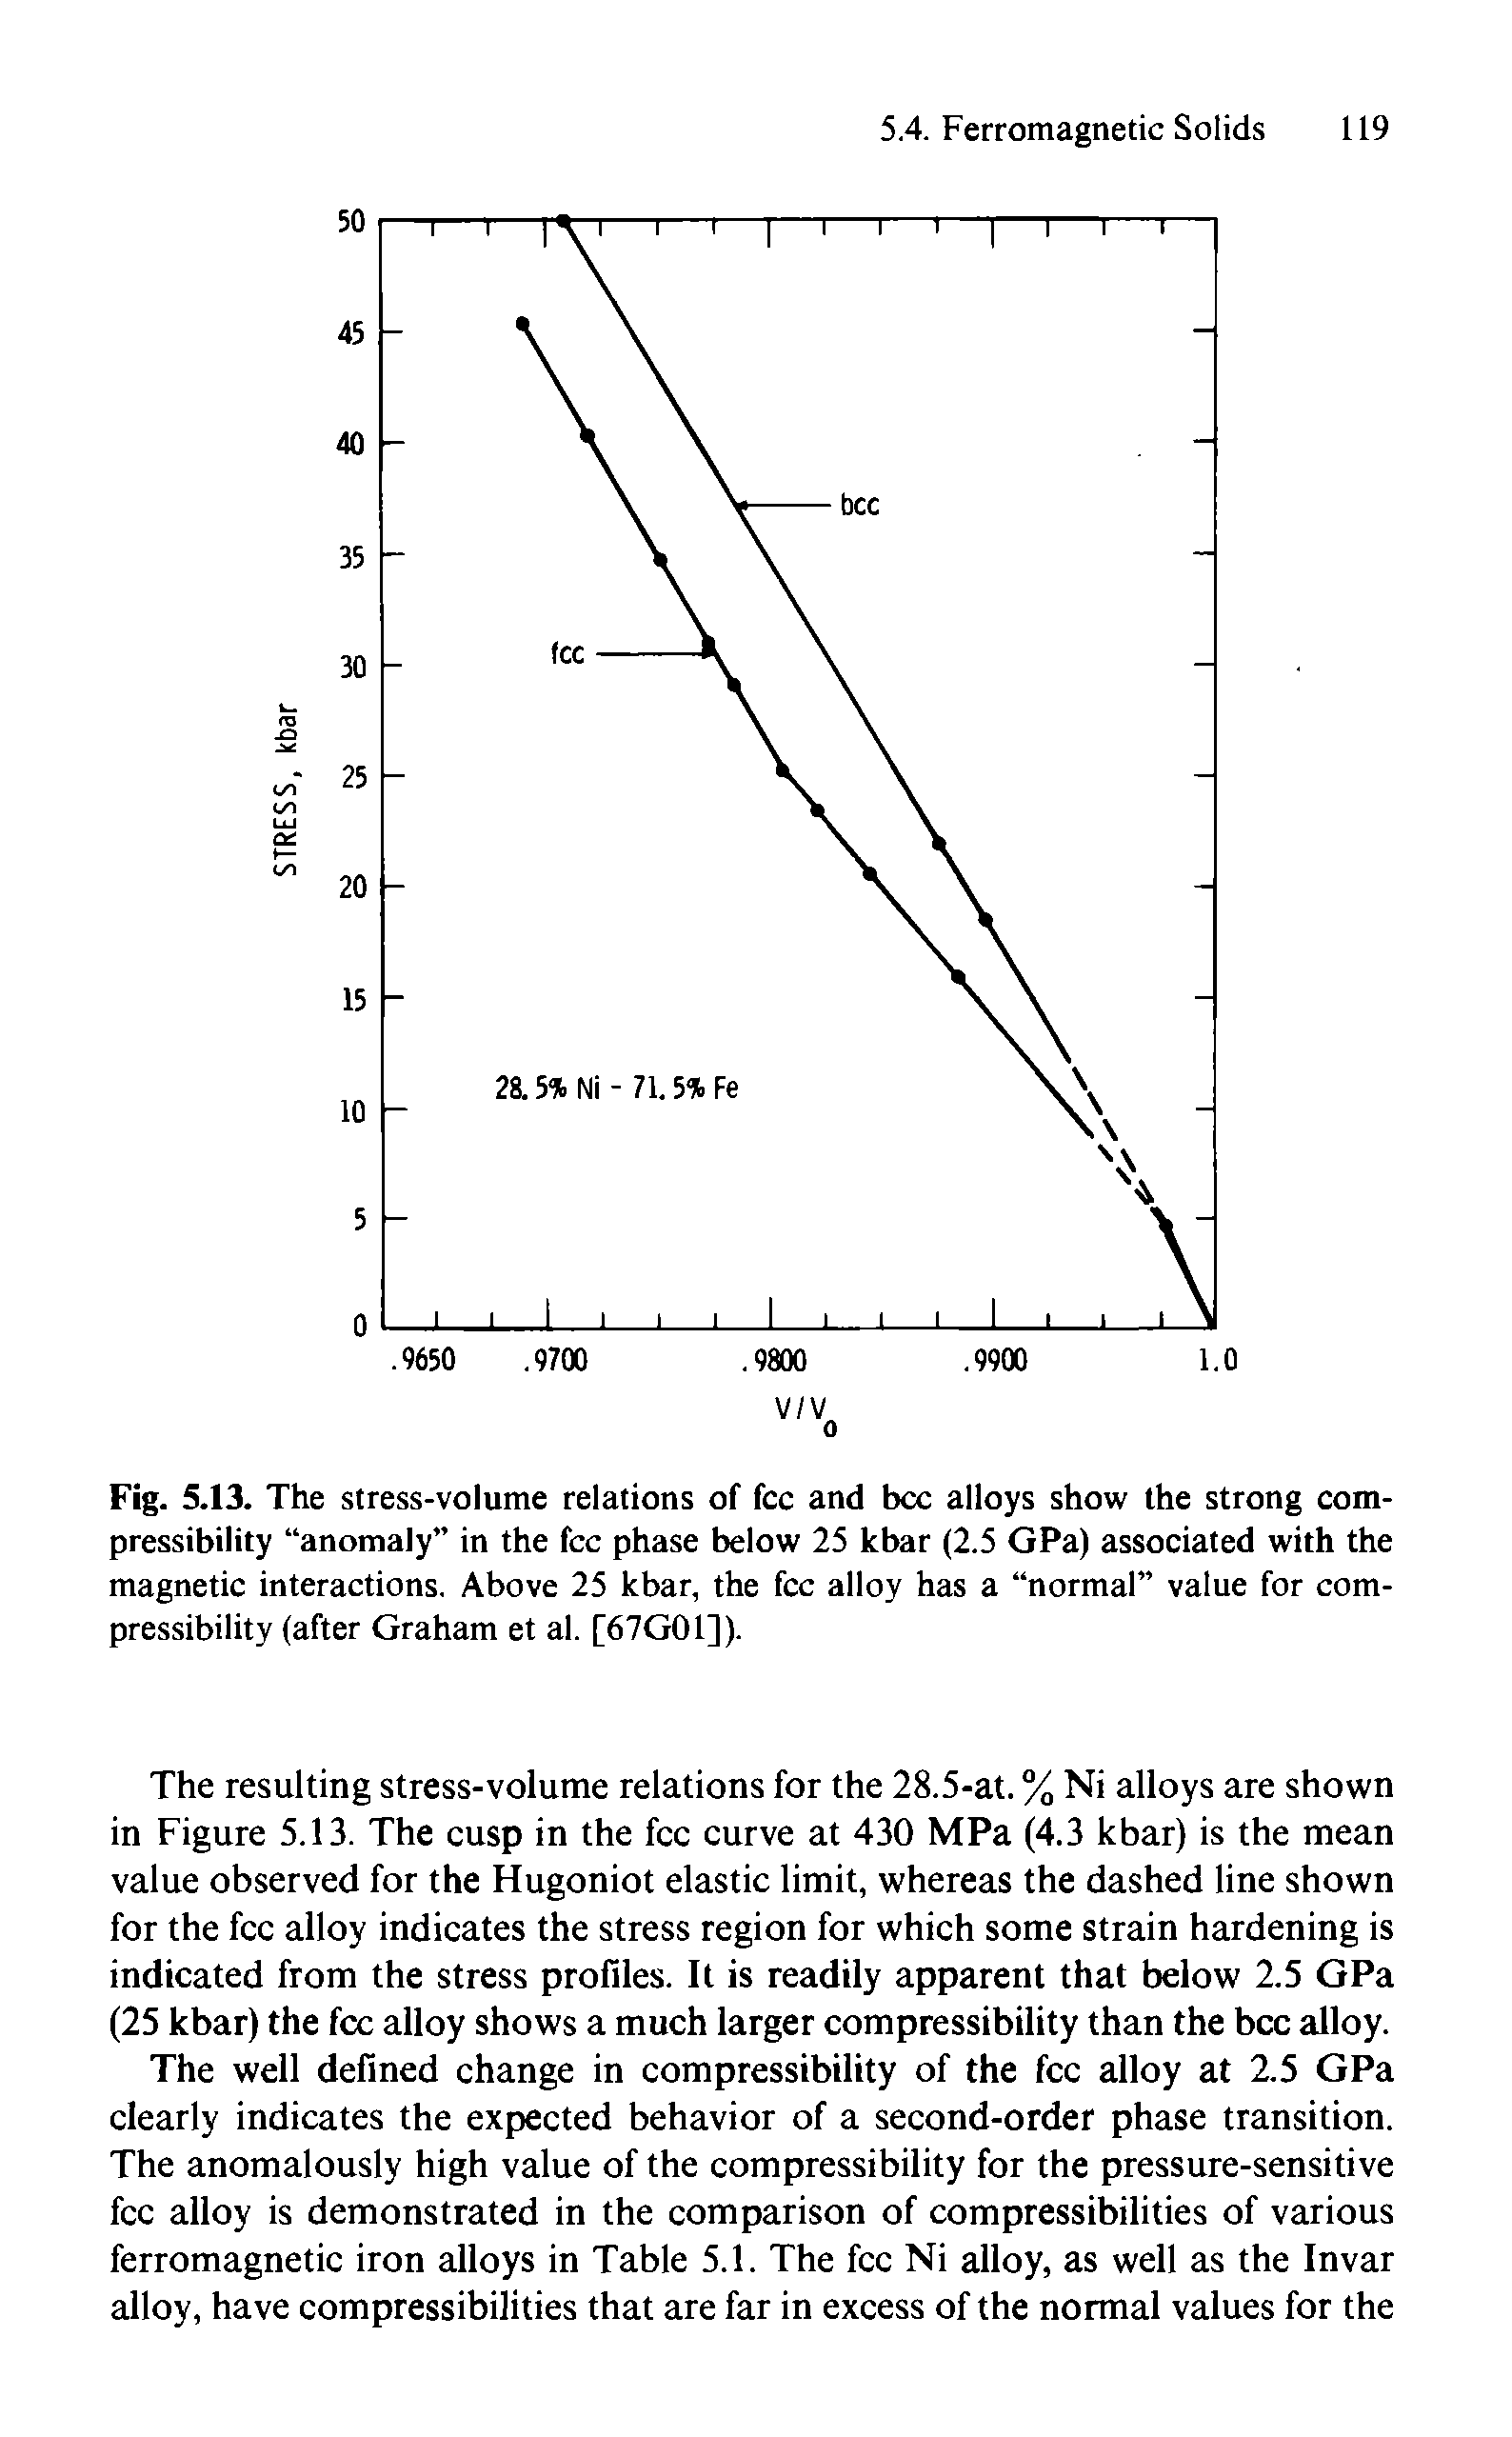 Fig. 5.13. The stress-volume relations of fee and bee alloys show the strong compressibility anomaly in the fee phase below 25 kbar (2.5 GPa) associated with the magnetic interactions. Above 25 kbar, the fee alloy has a normal value for compressibility (after Graham et al. [67G01]).